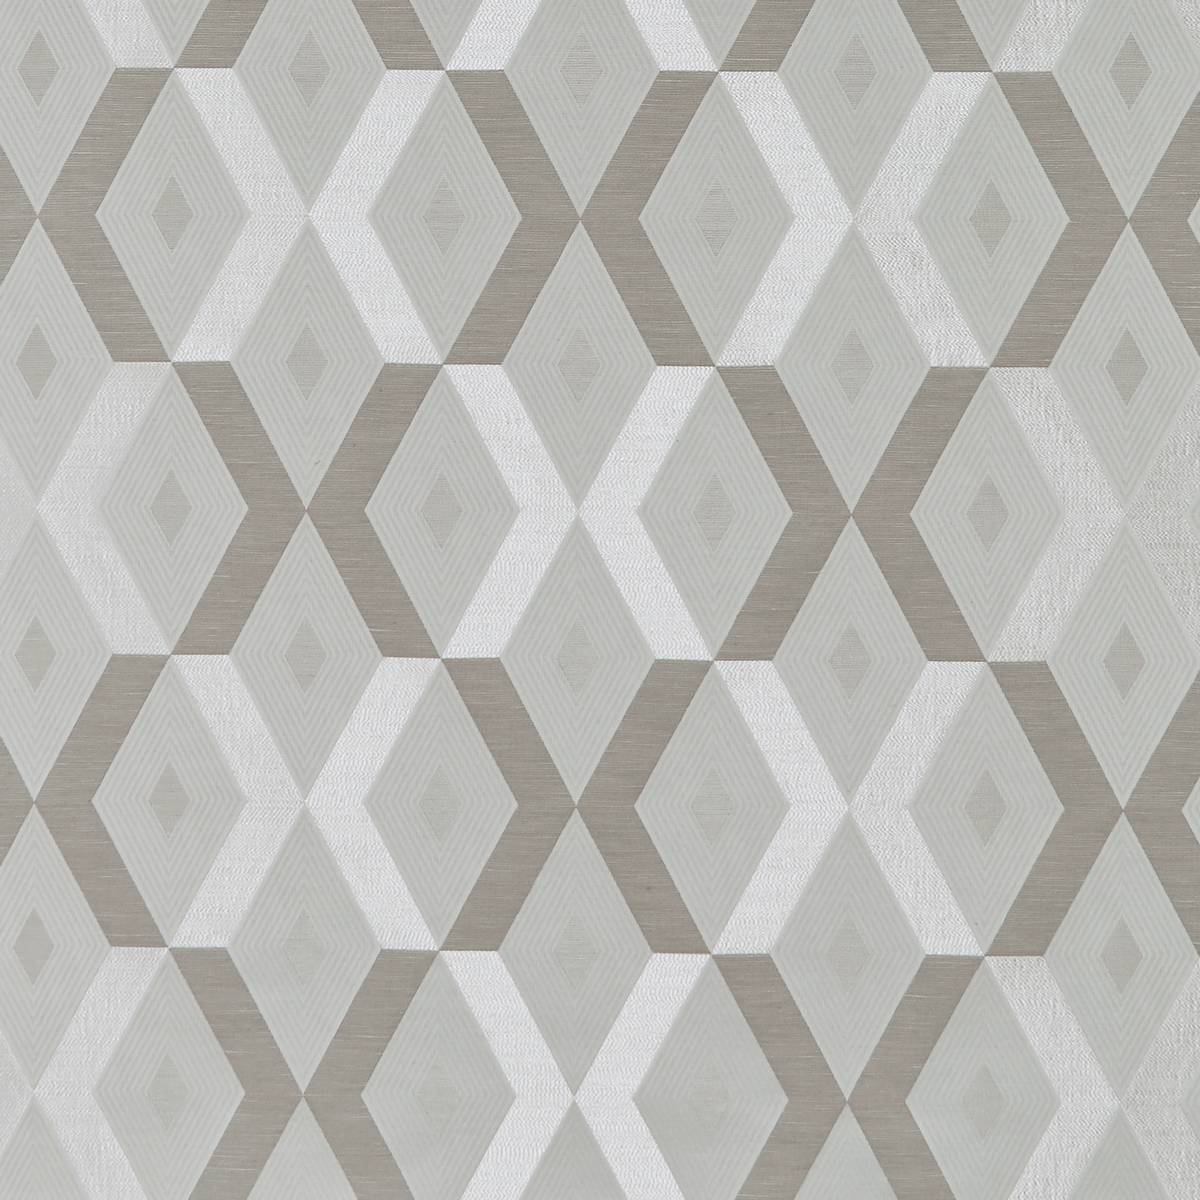 Thenon Linen Fabric by Ashley Wilde